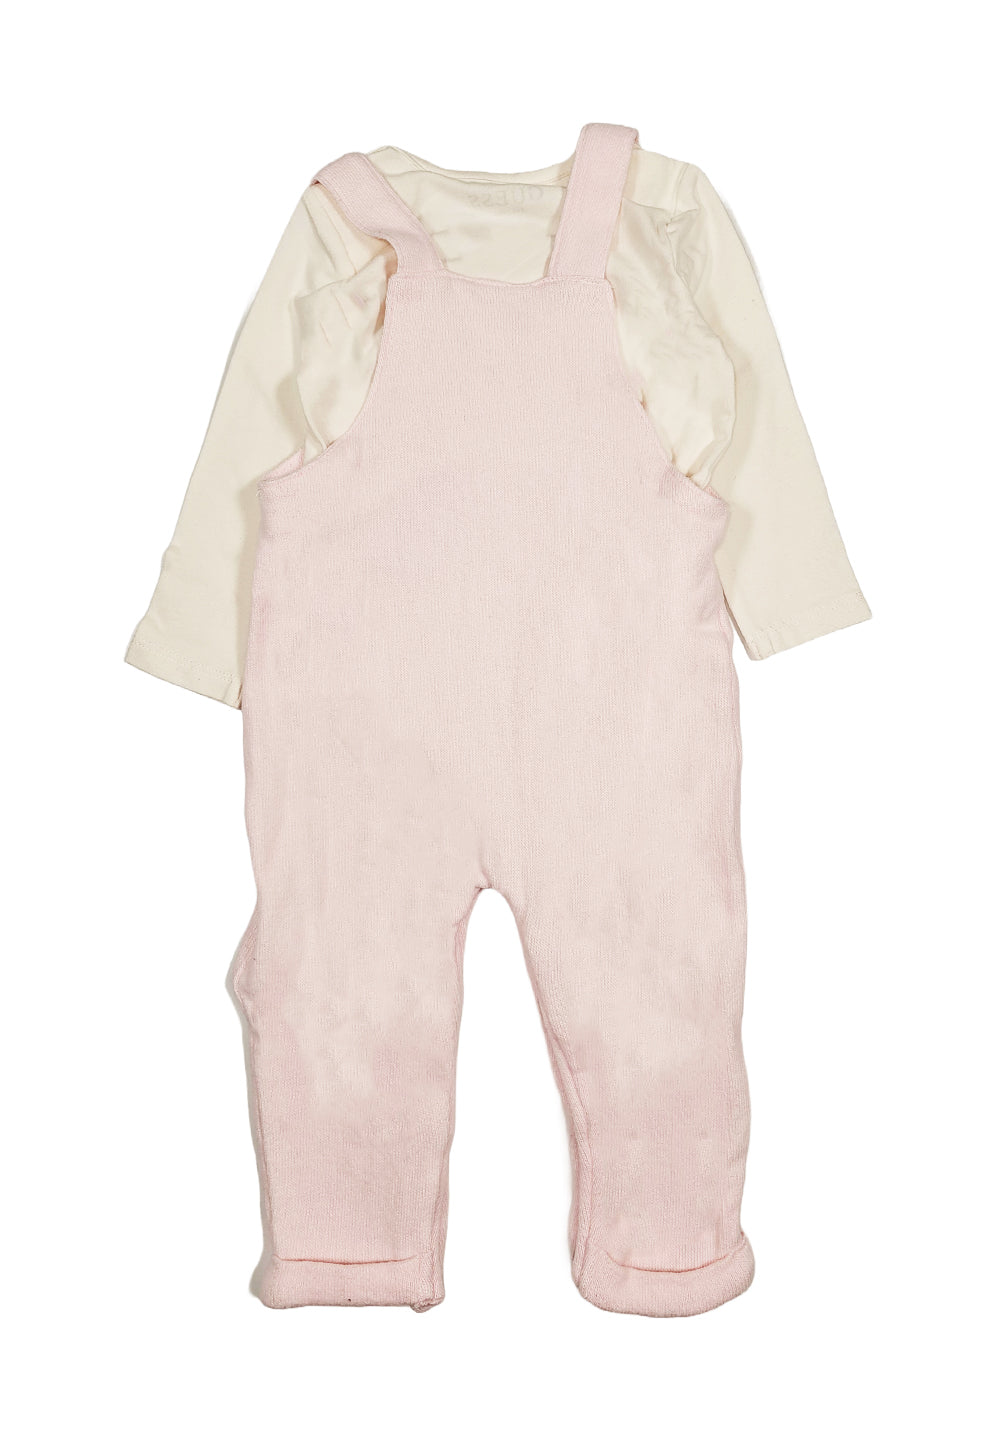 Pink overalls set for baby girls